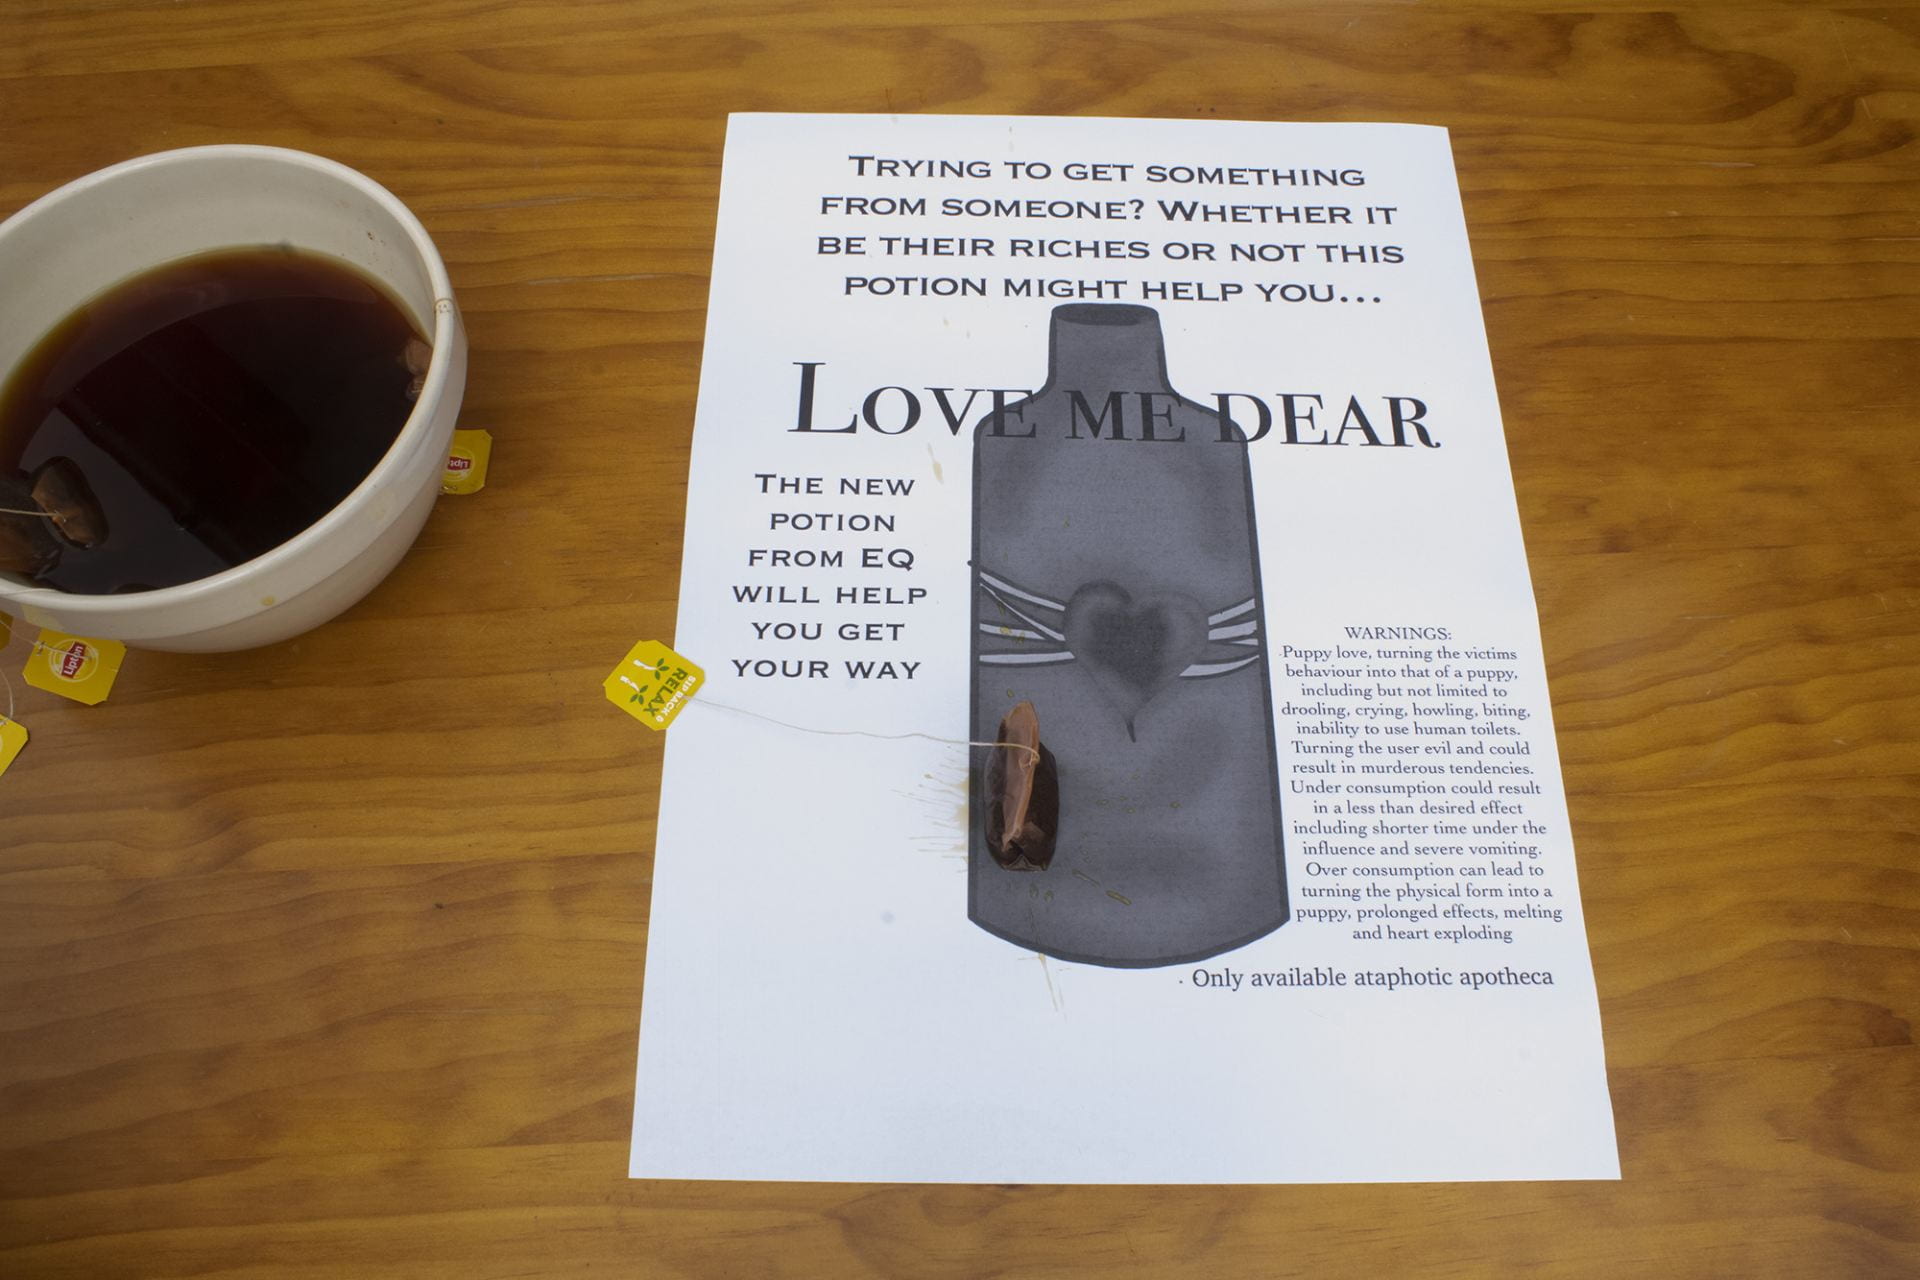 A3 poster with an image of a bottle and text saying Love Me Dear. A bowl of tea on the left and a tea bag on the poster.